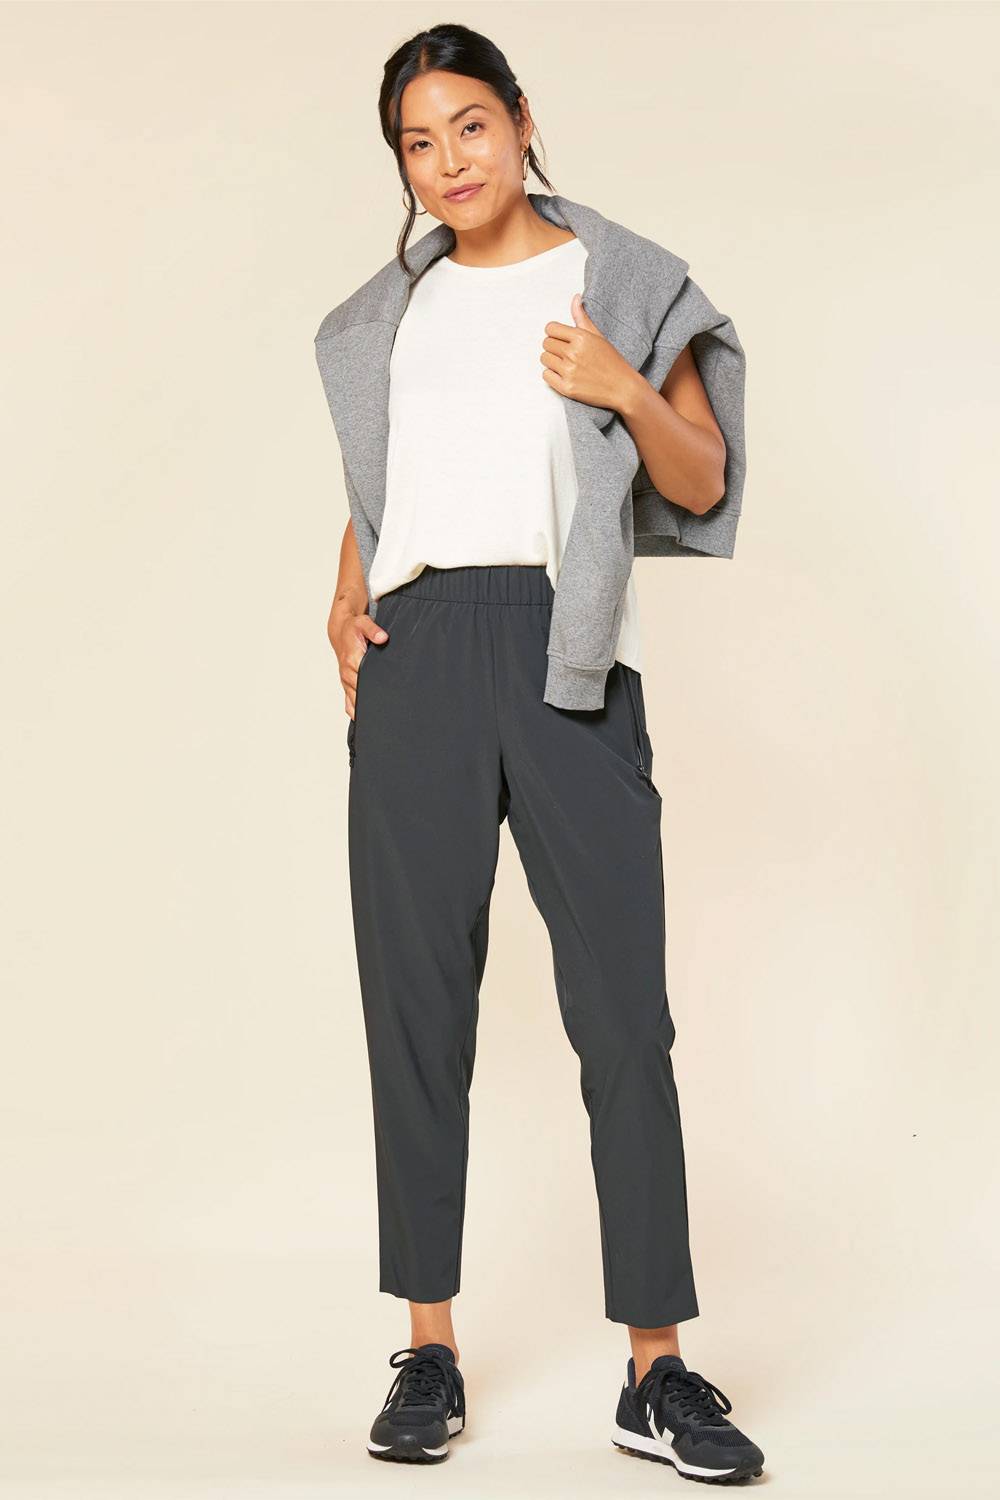 outerknown comfortable maternity trousers